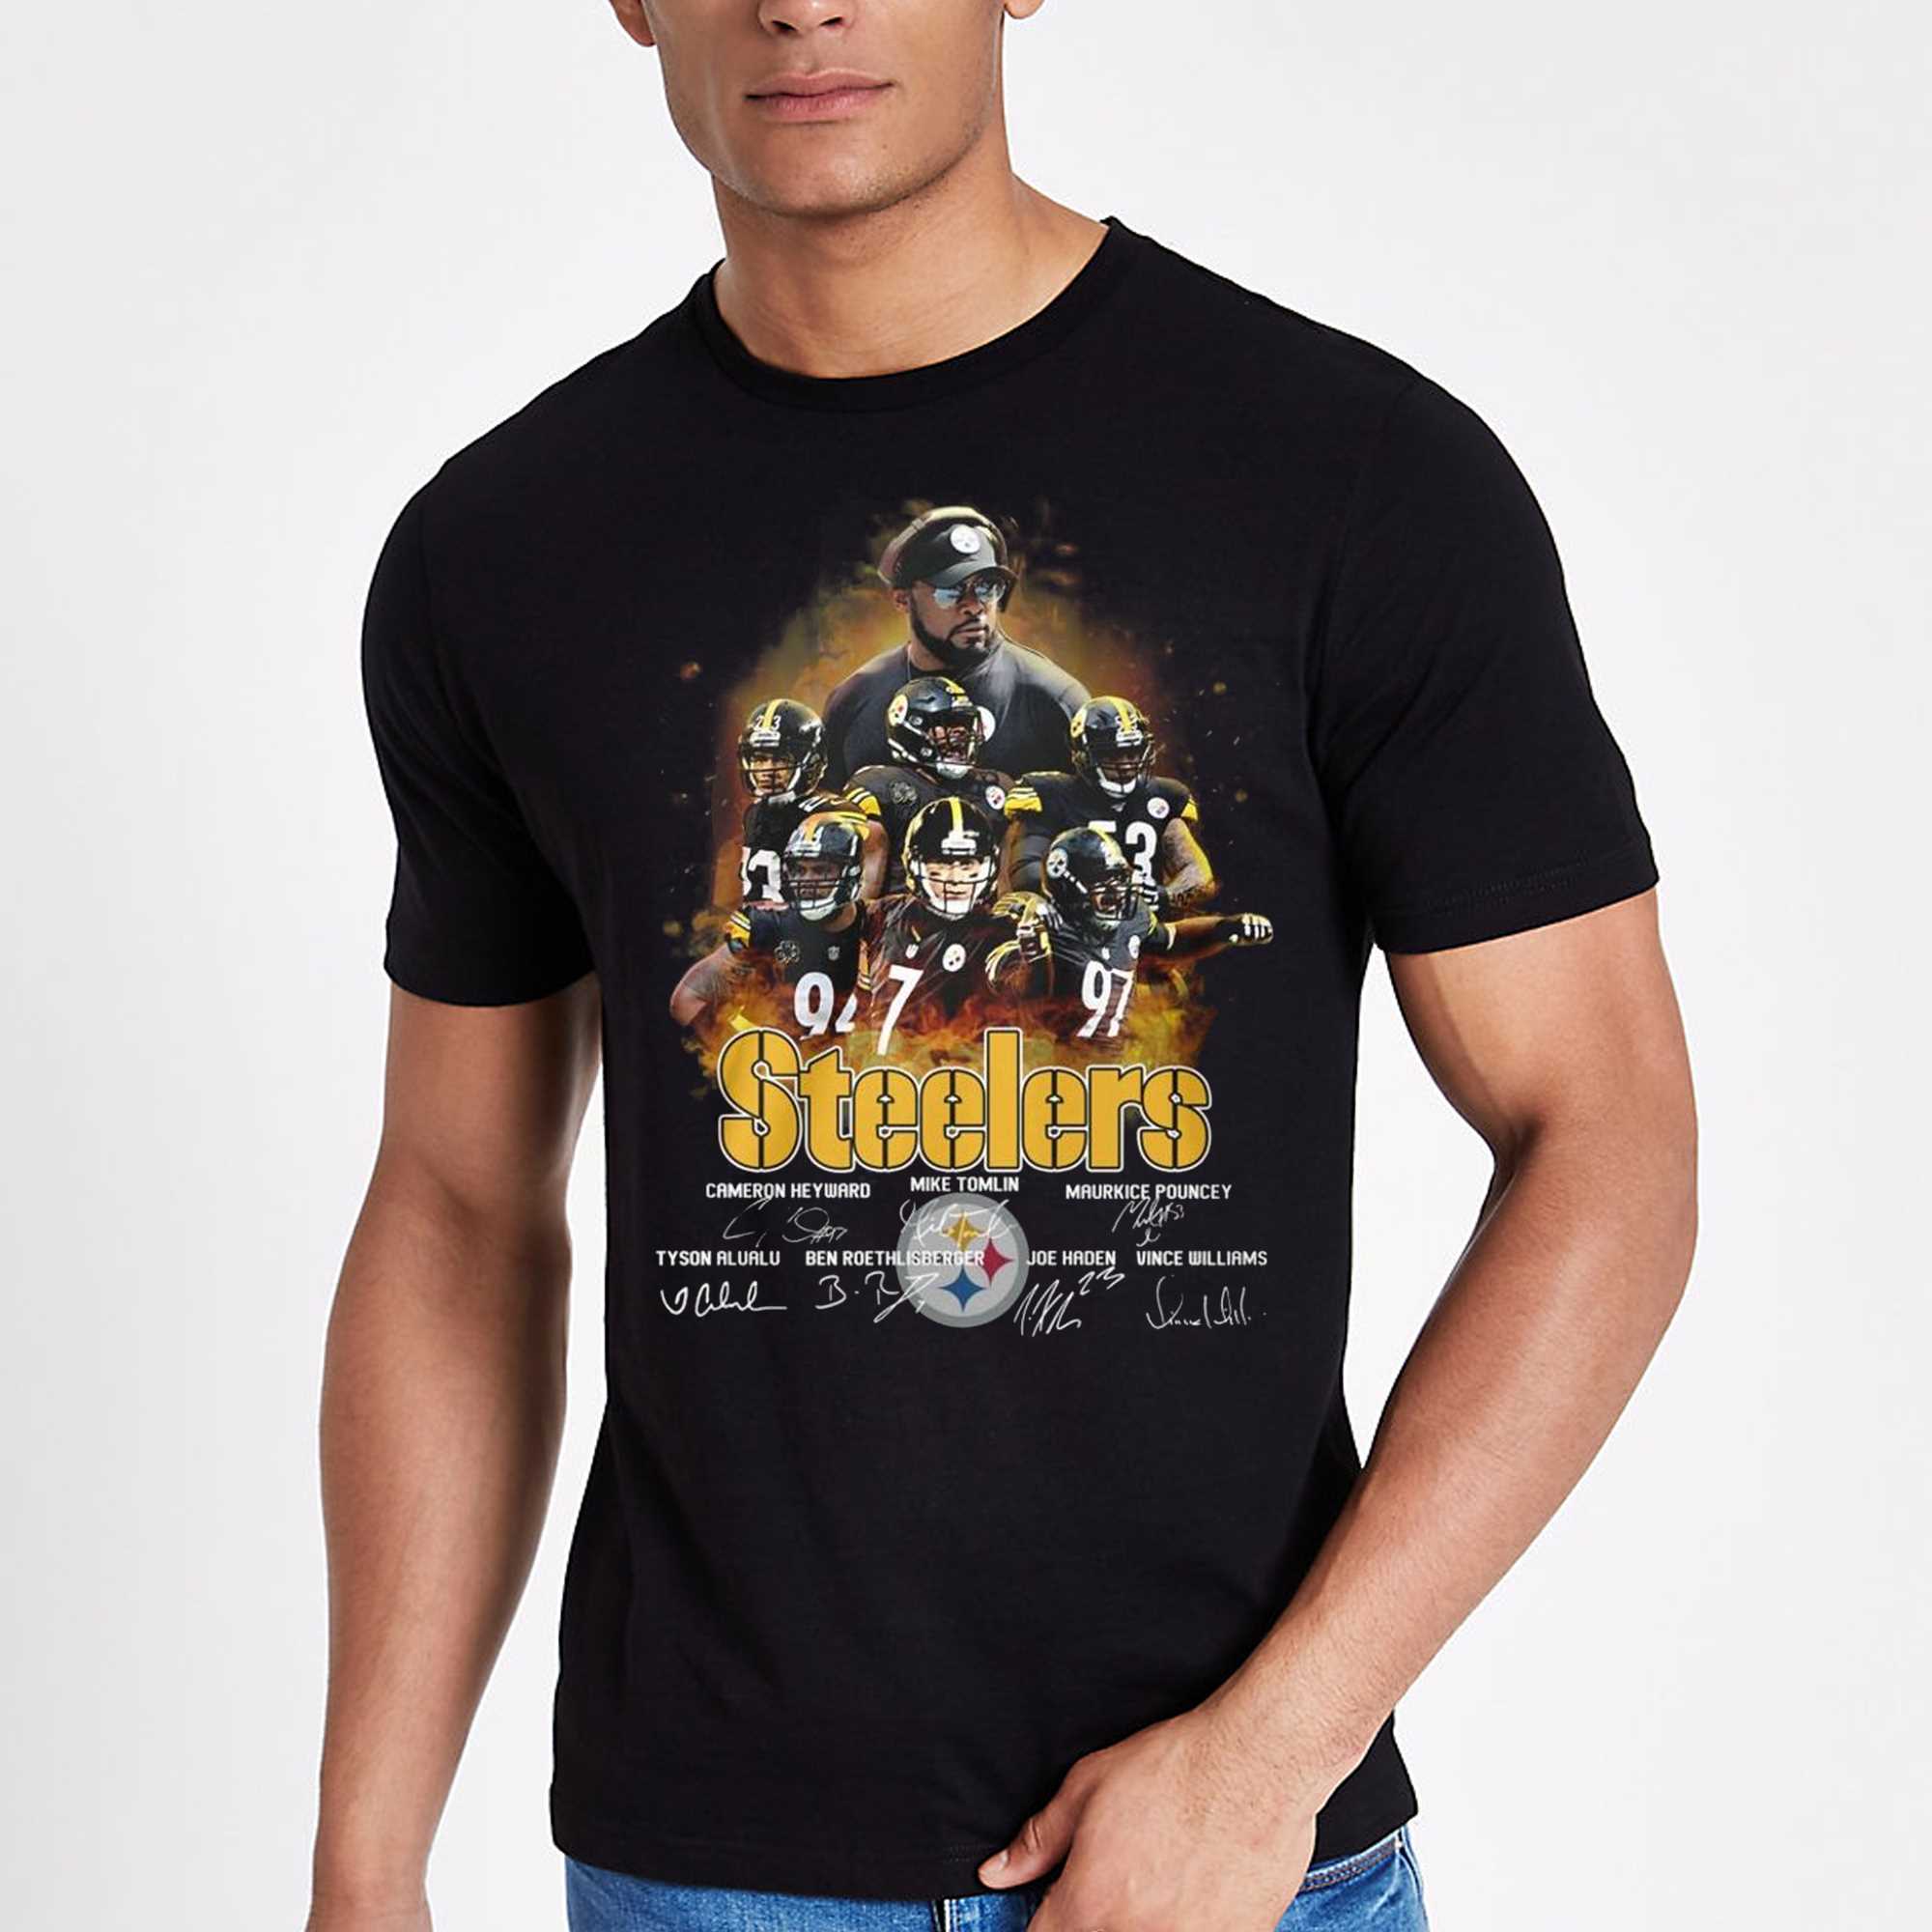 pittsburgh steelers clothing cheap